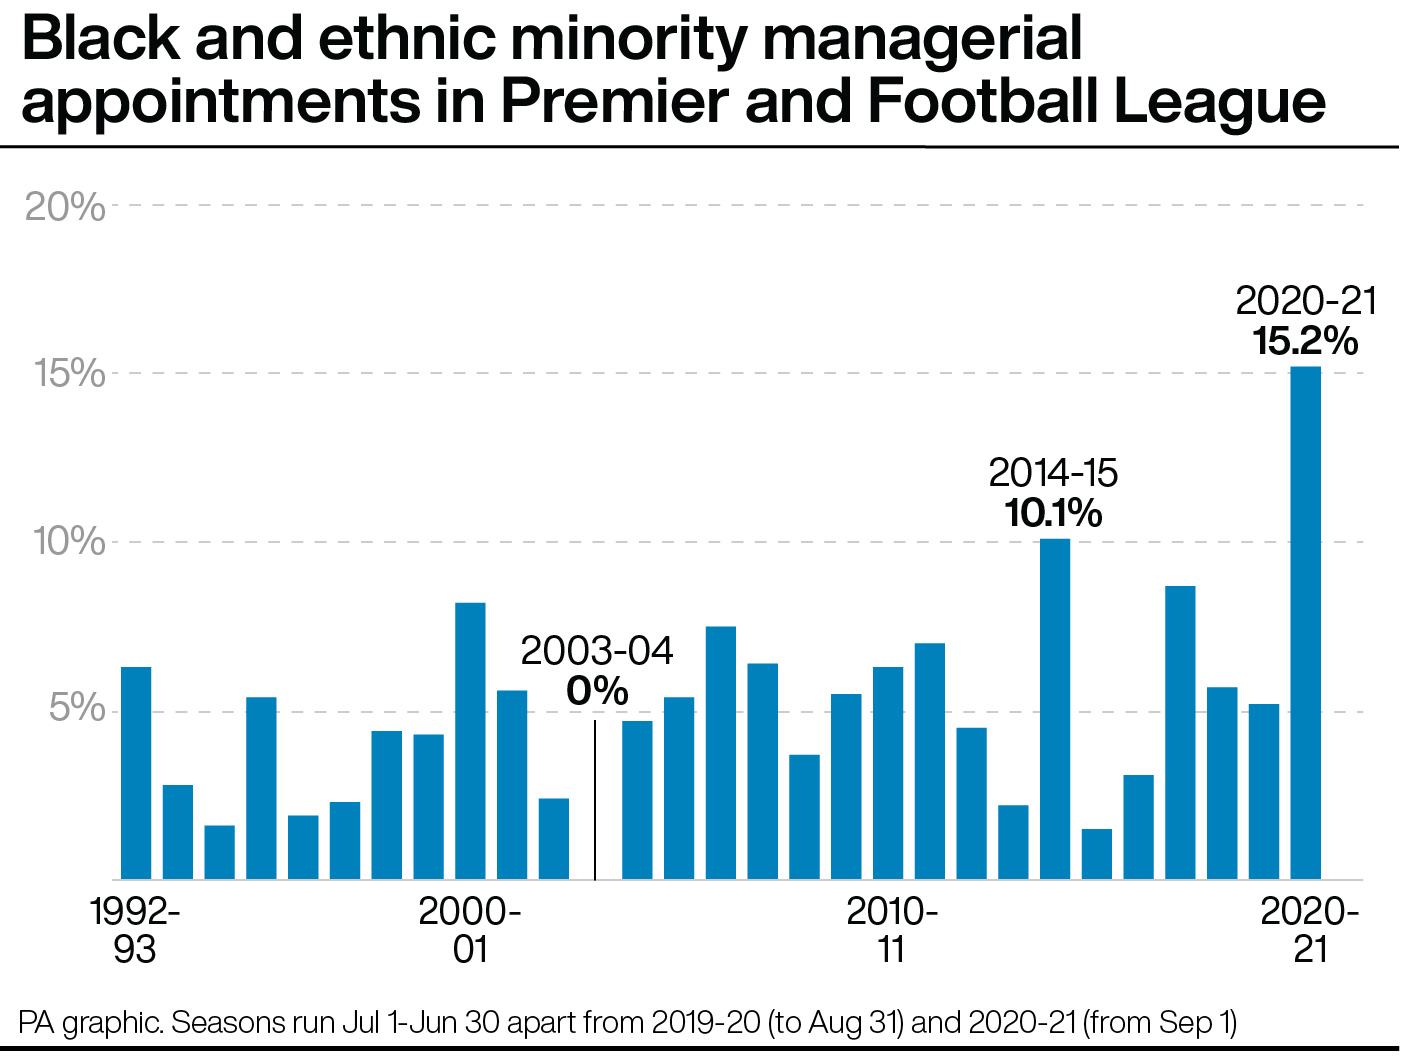 Five of this season's 33 managerial appointments, 15.2 per cent, have been black or of minority ethnicity